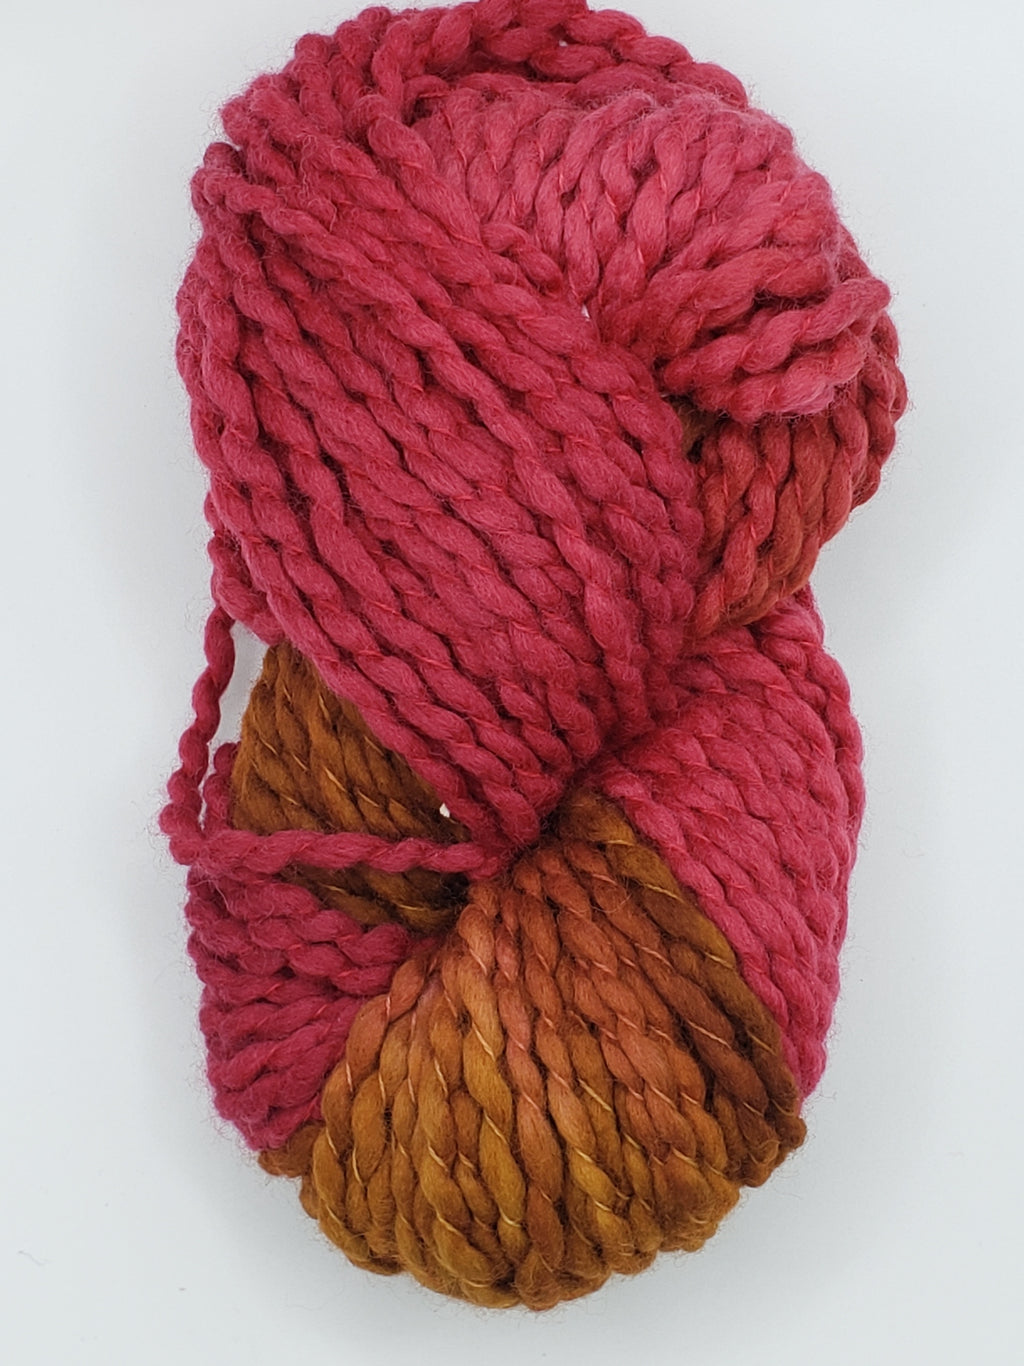 Crimp - RED MAPLE - Hand Dyed Chunky Textured Yarn - Landscape Shades